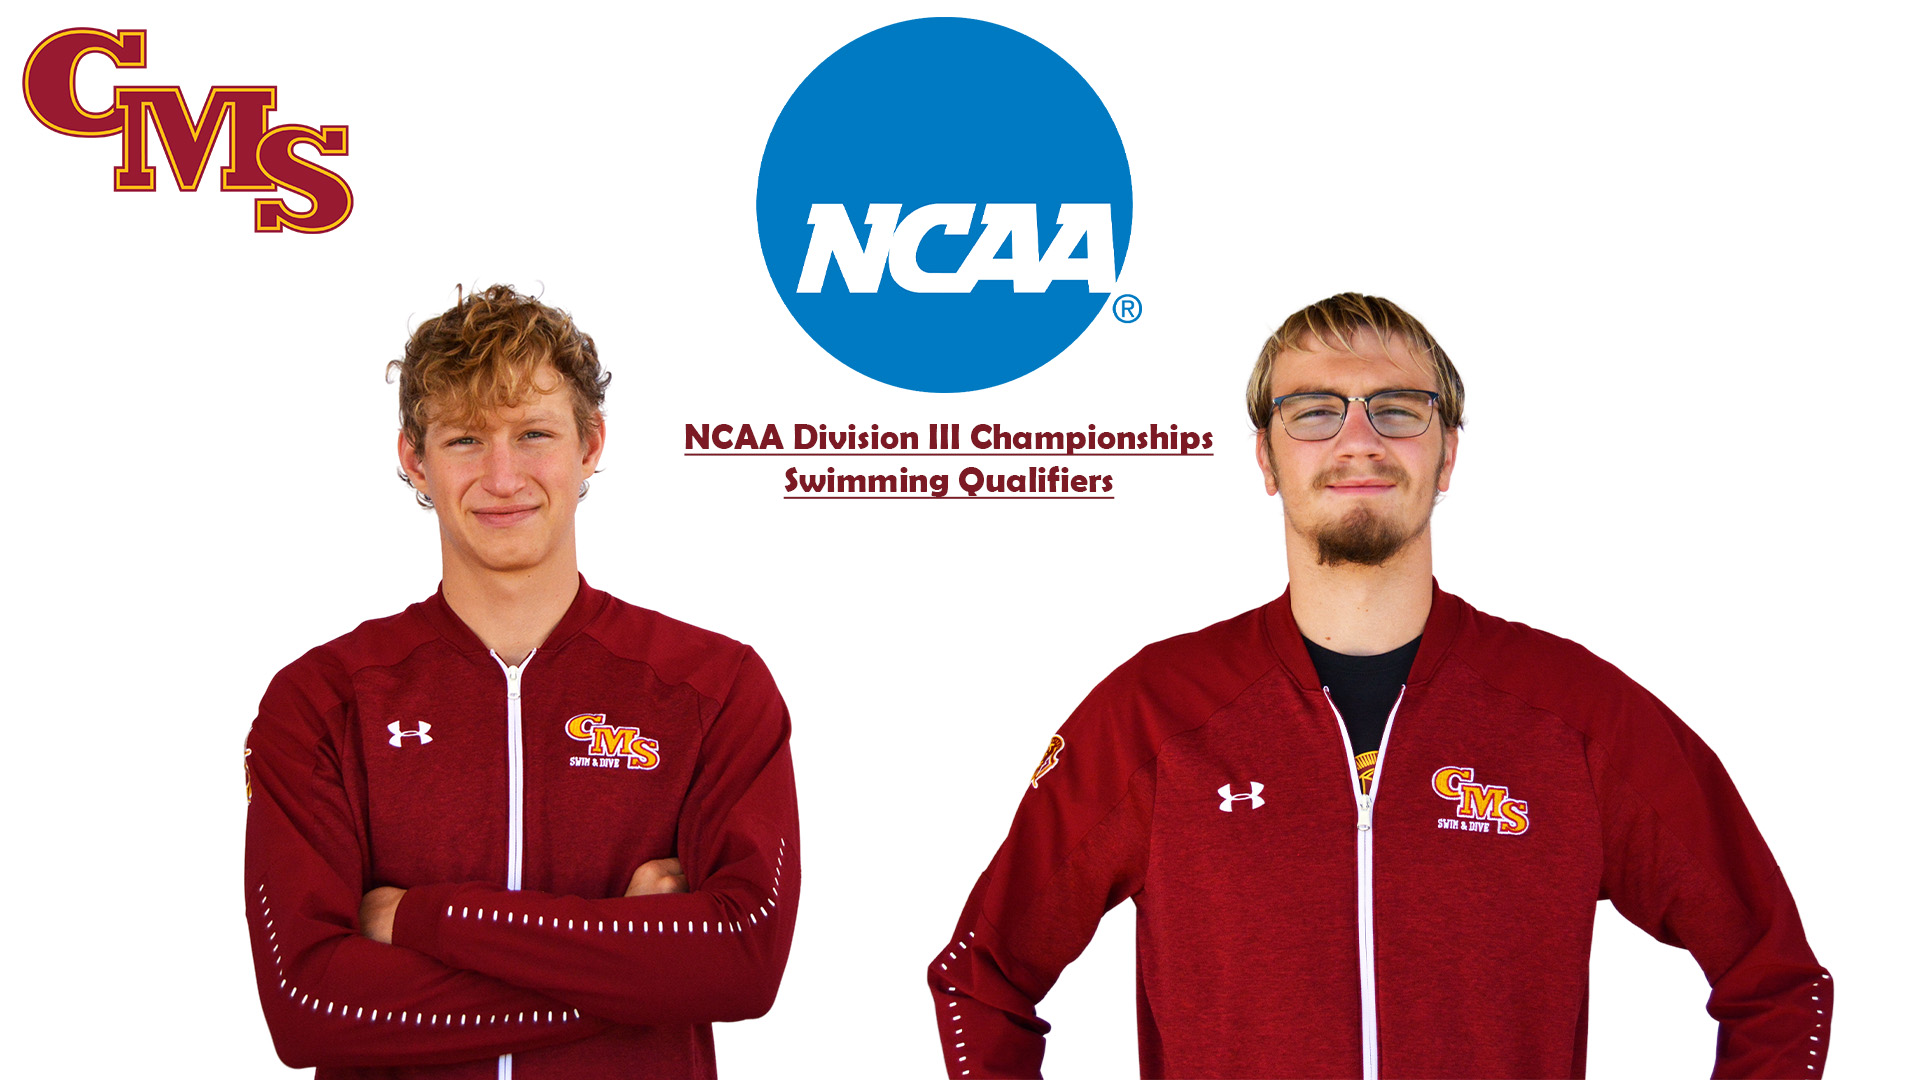 Frank Applebaum (l) and Lucas Lang (r) will be national title contenders